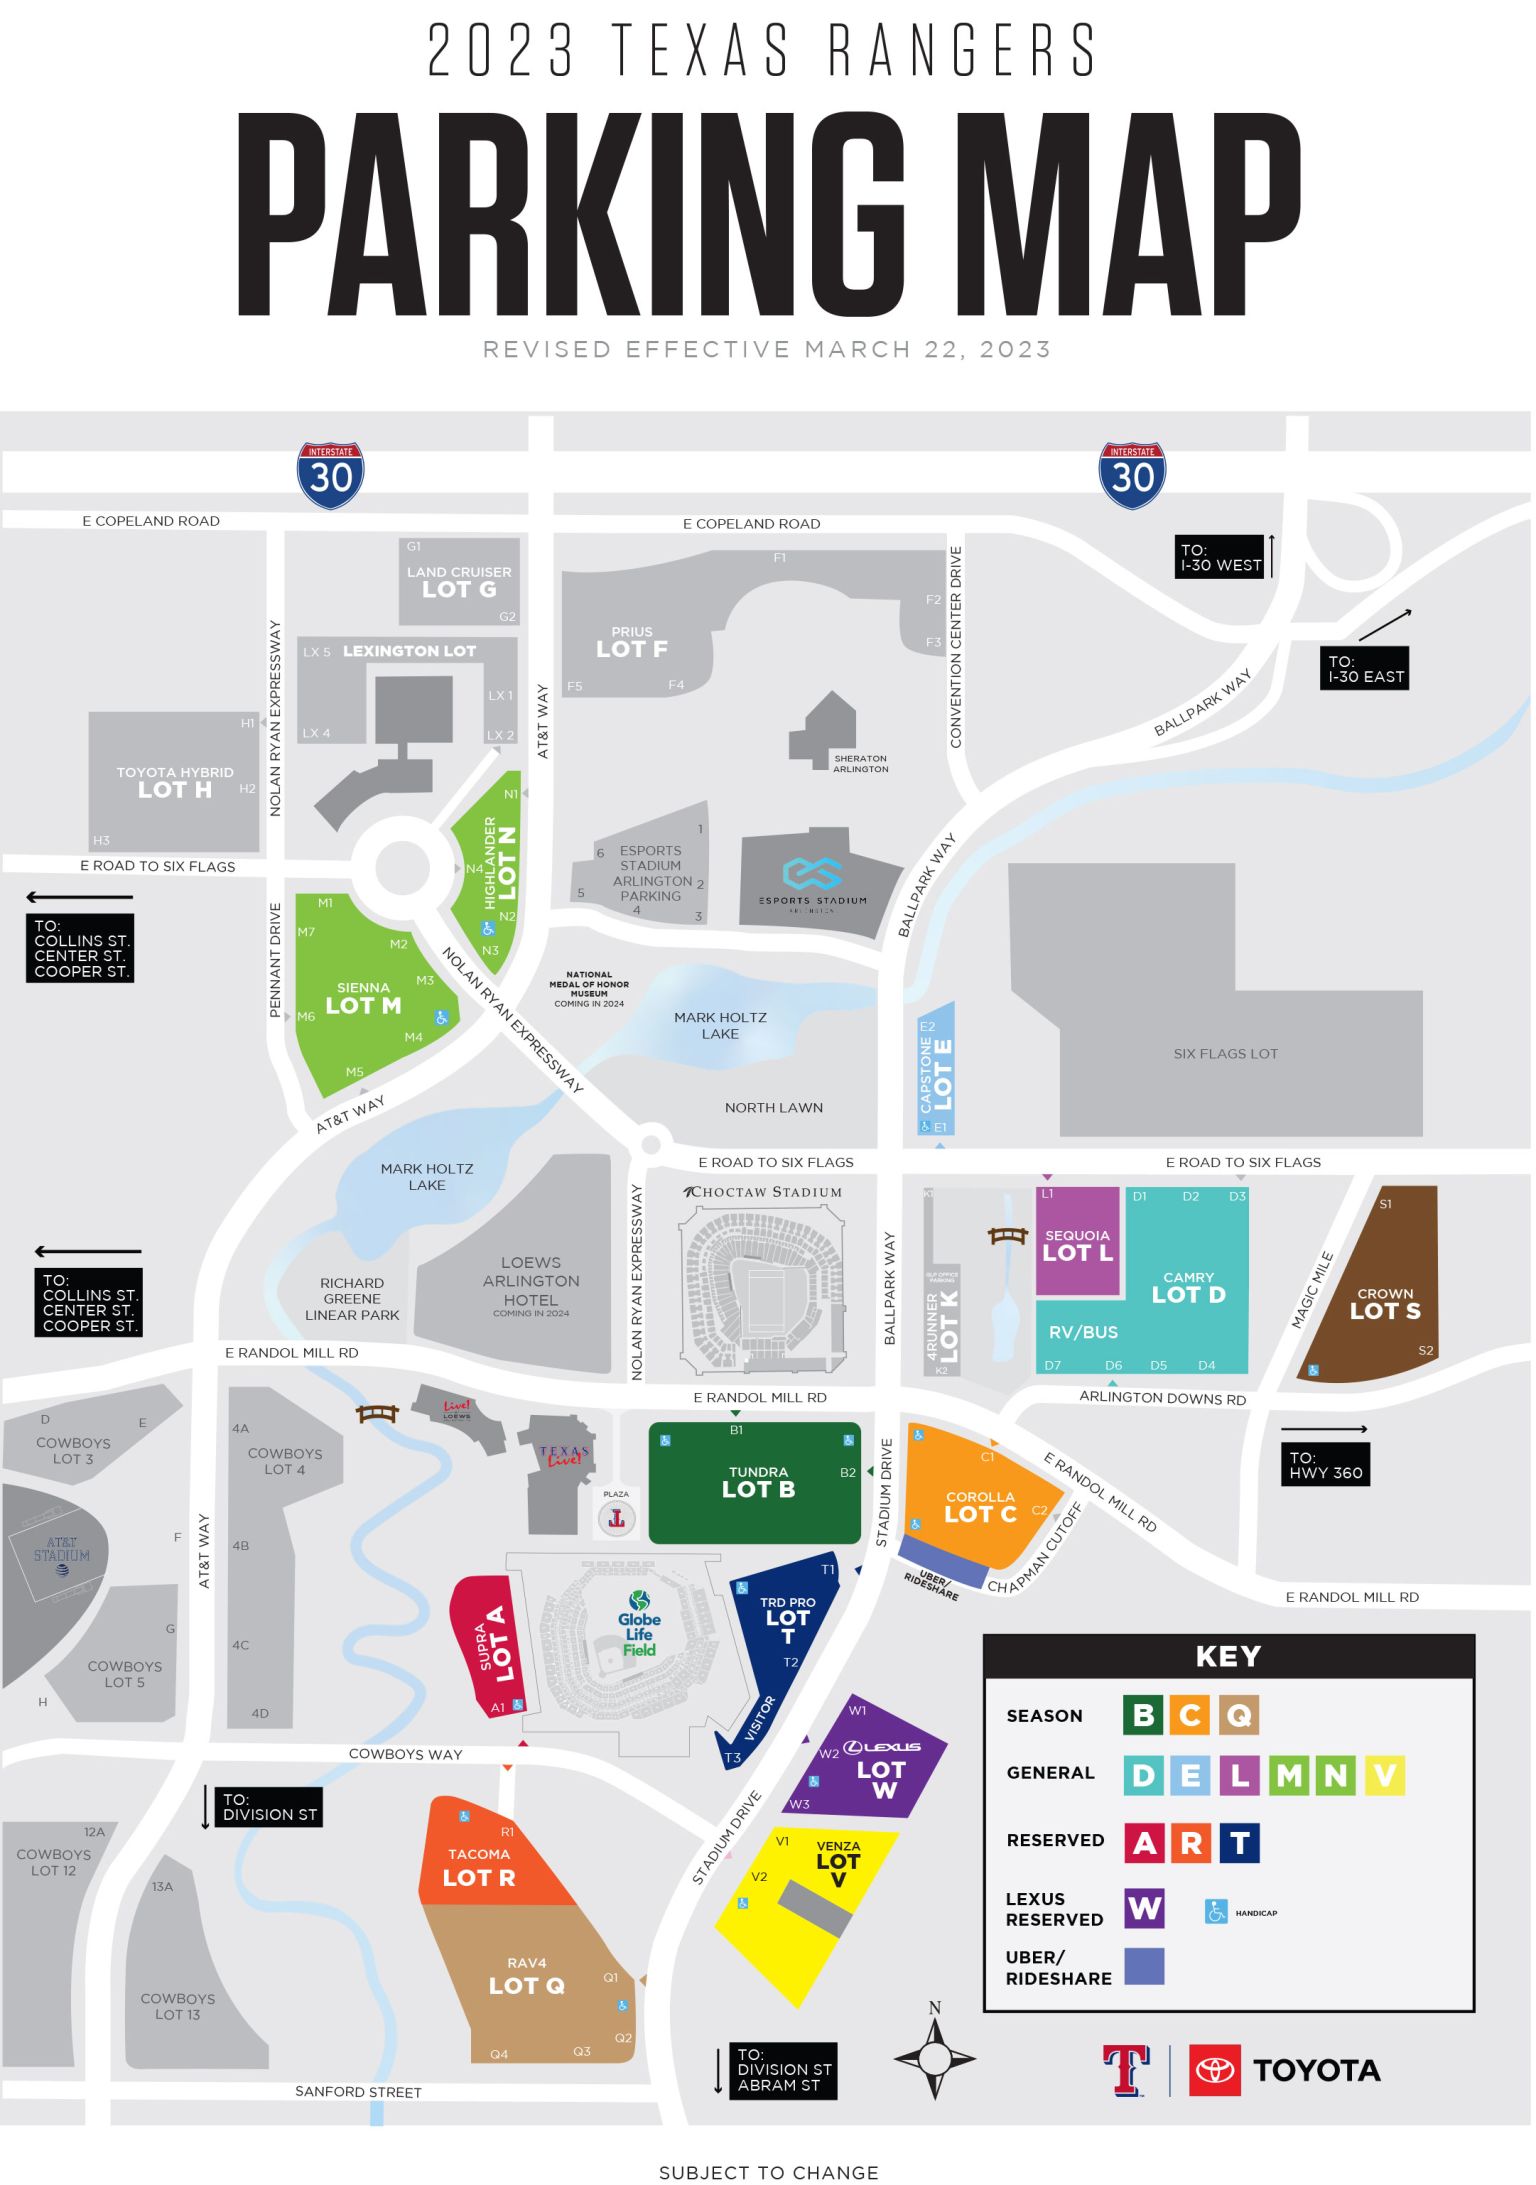 Where to Park at Globe Life Field